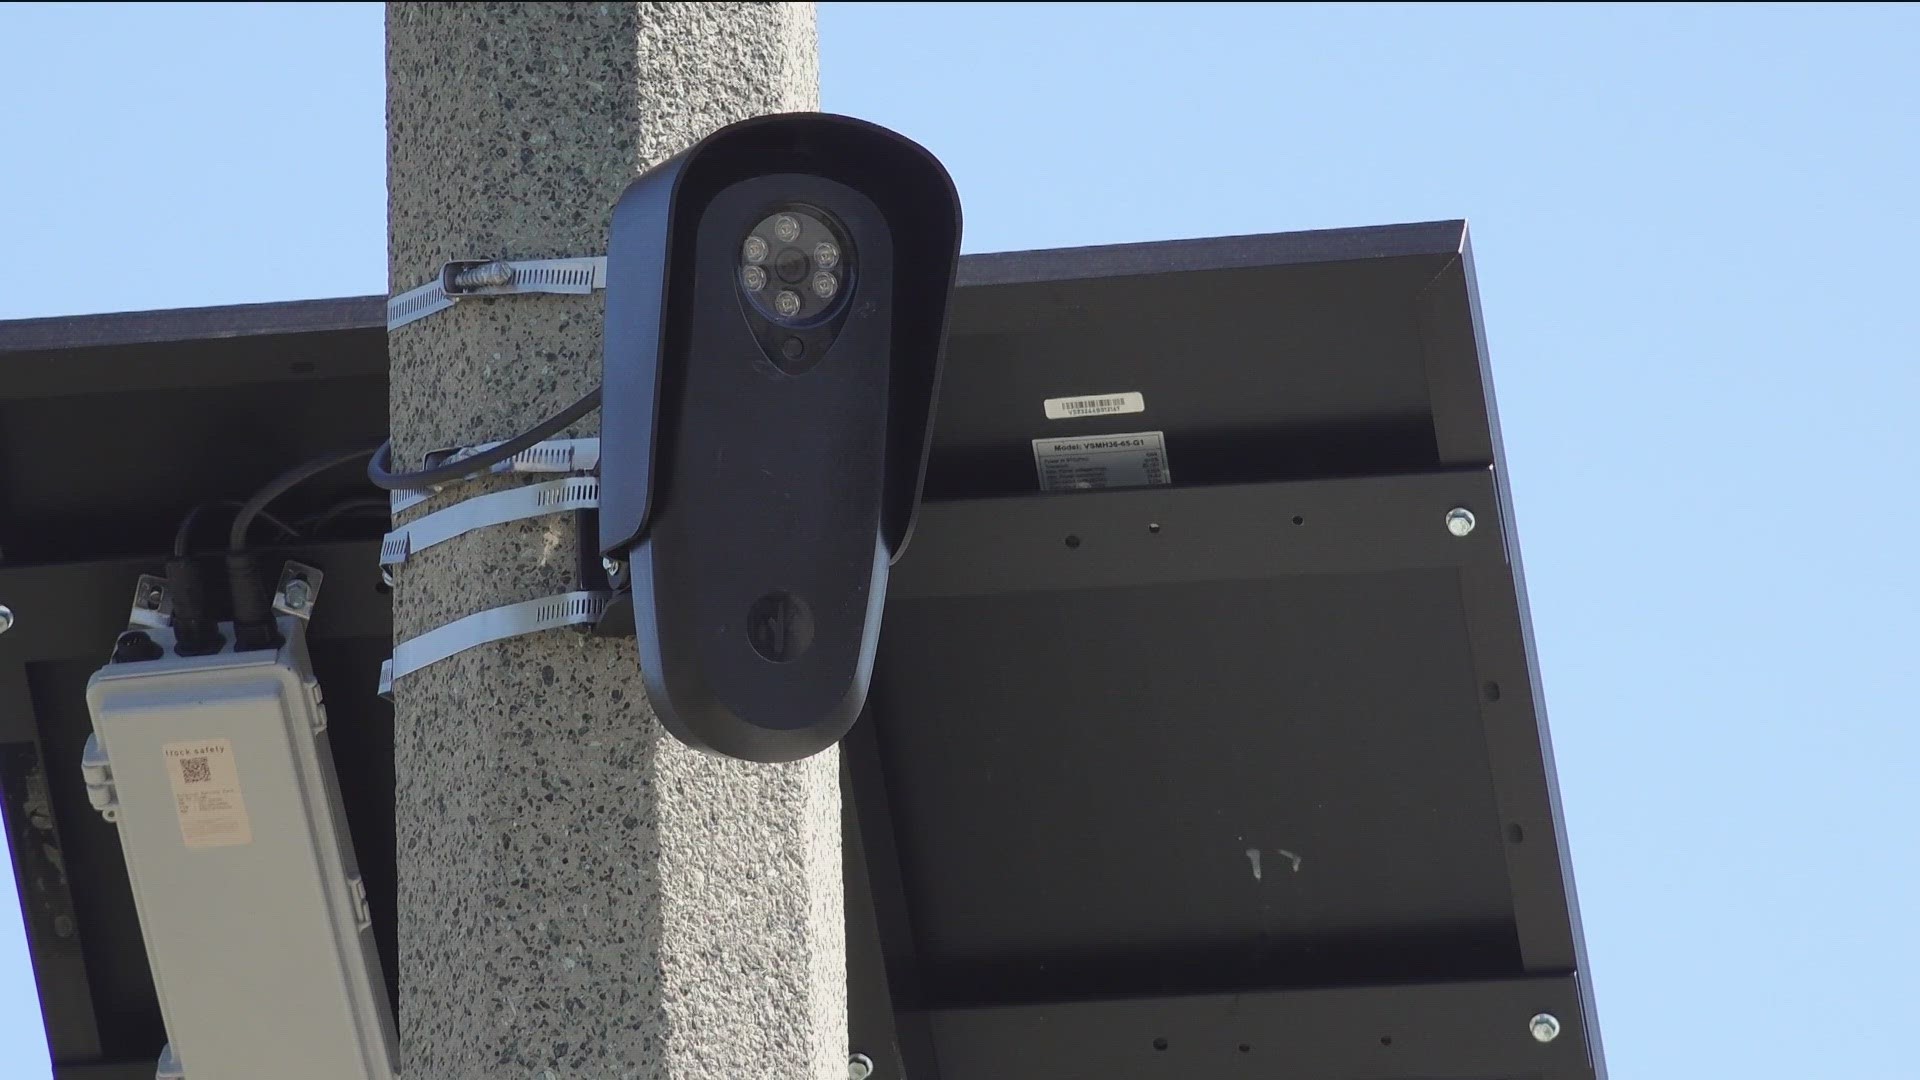 The department has over 80 new license plate readers around the city with more on the way.